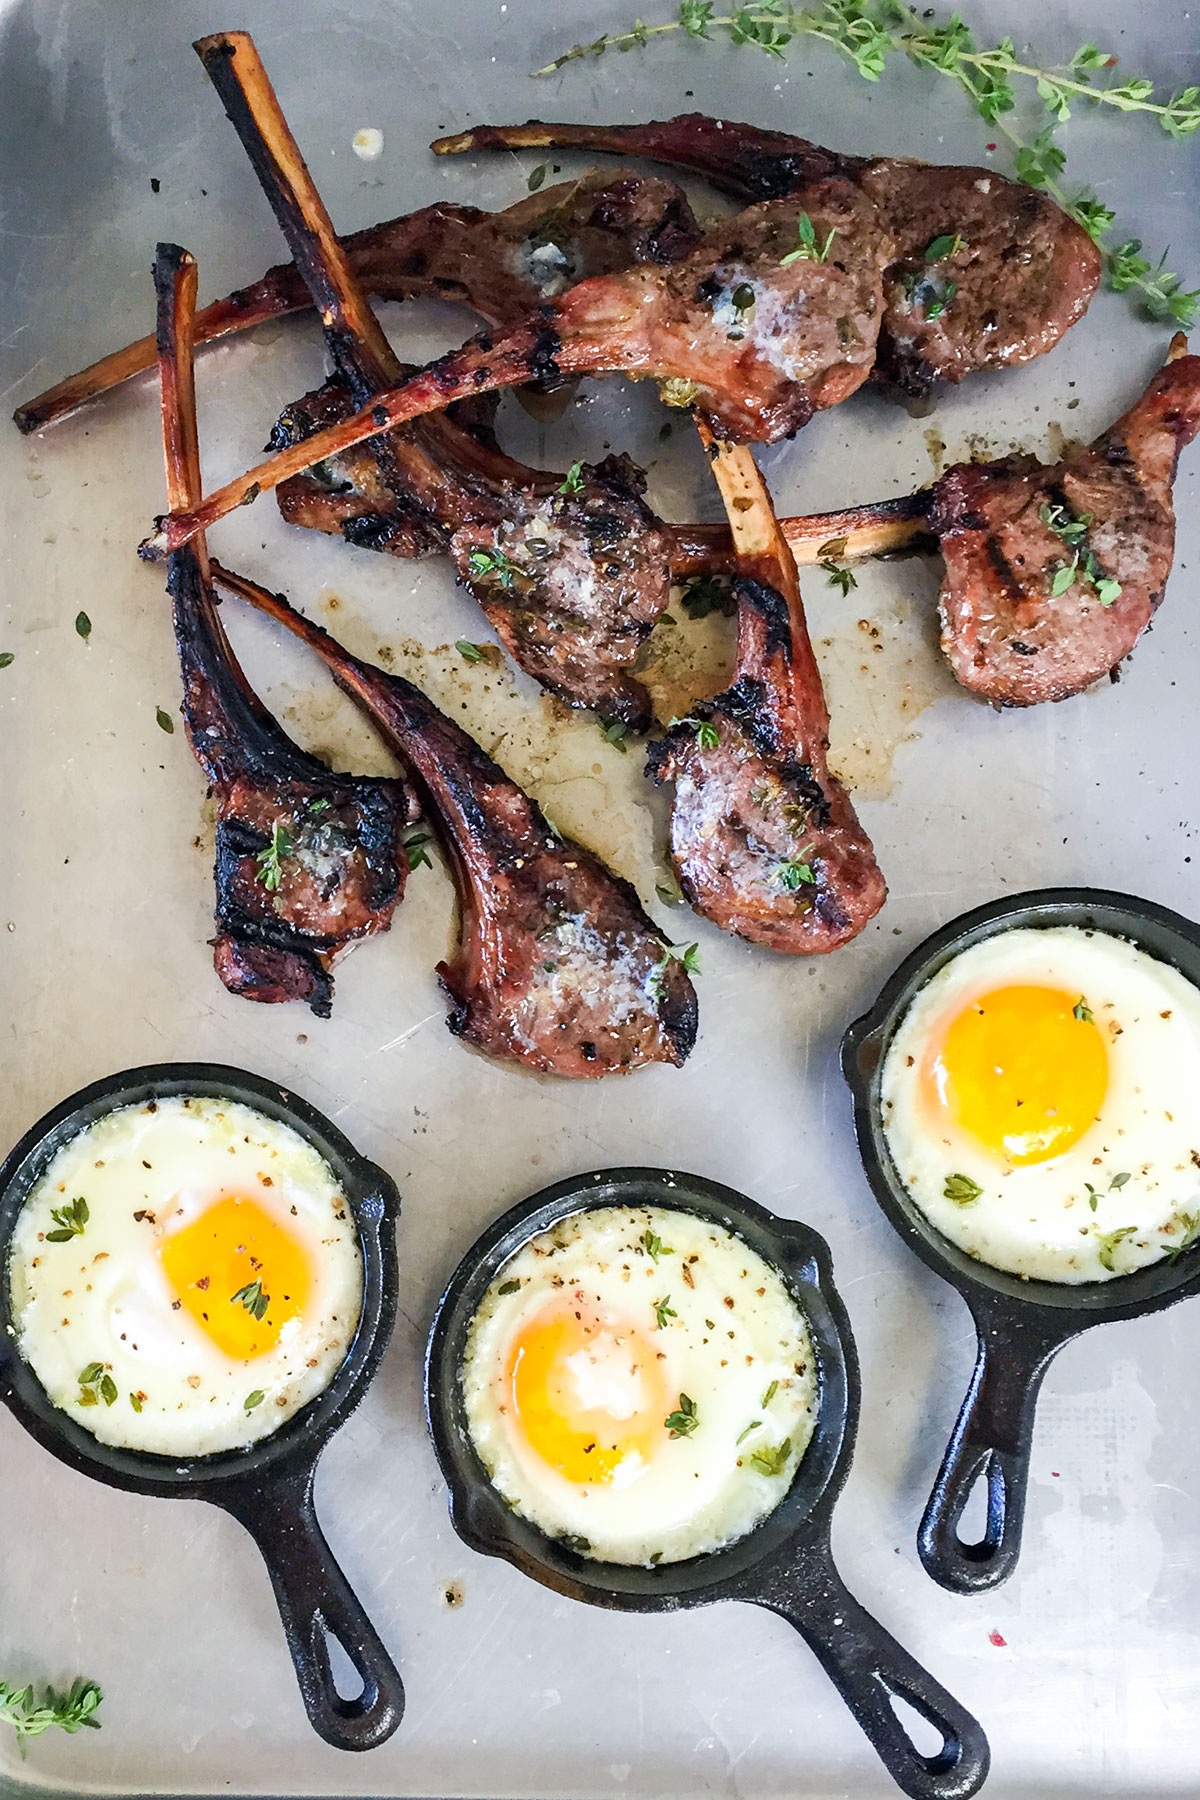 Grilled lamb chops and fried eggs.